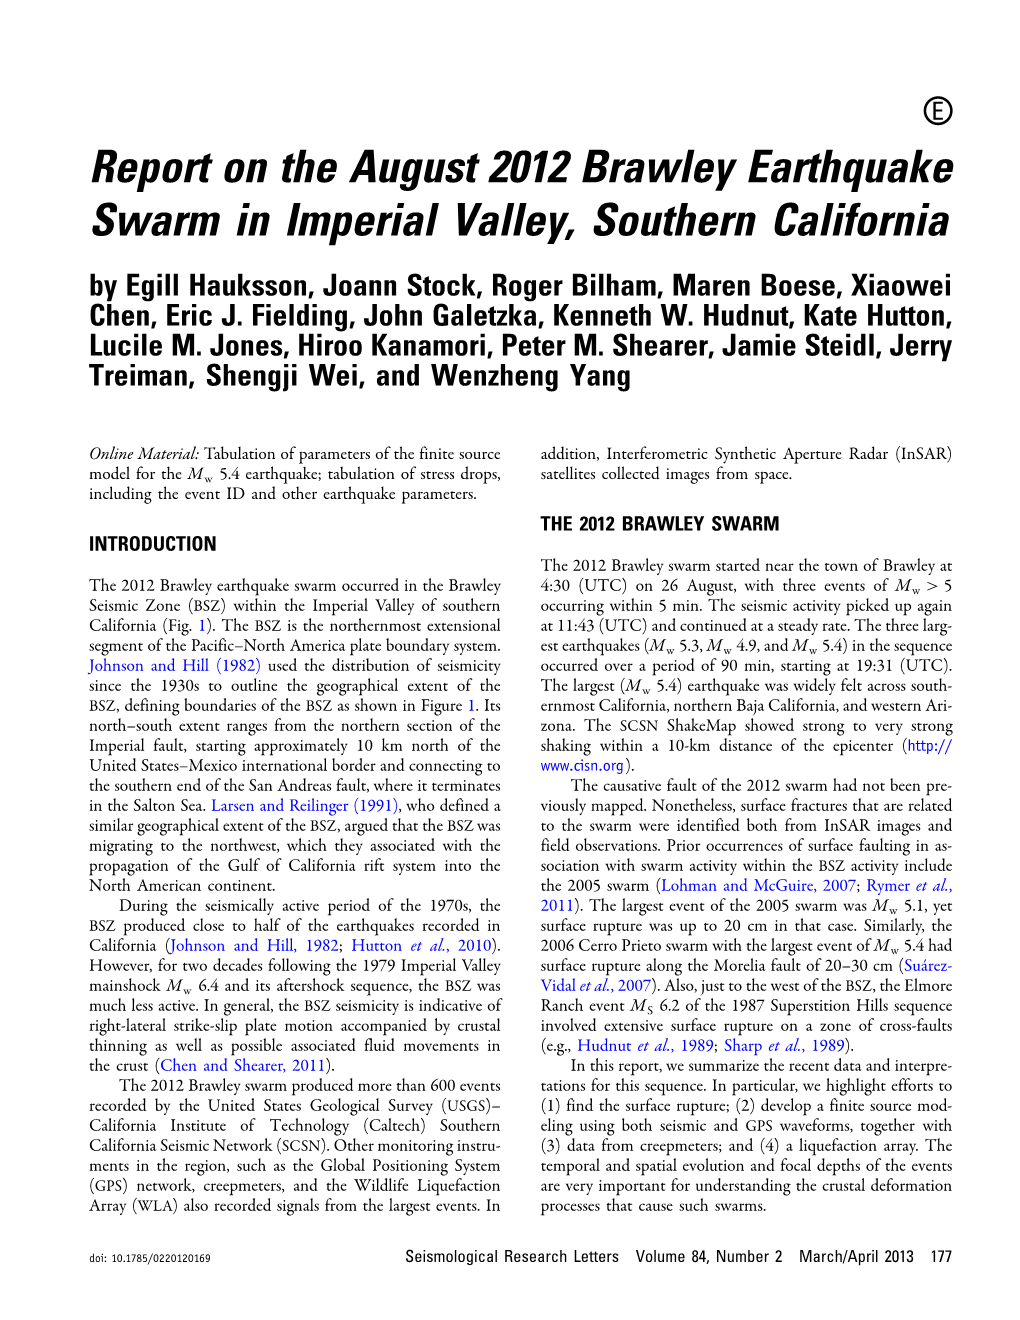 Report on the August 2012 Brawley Earthquake Swarm in Imperial